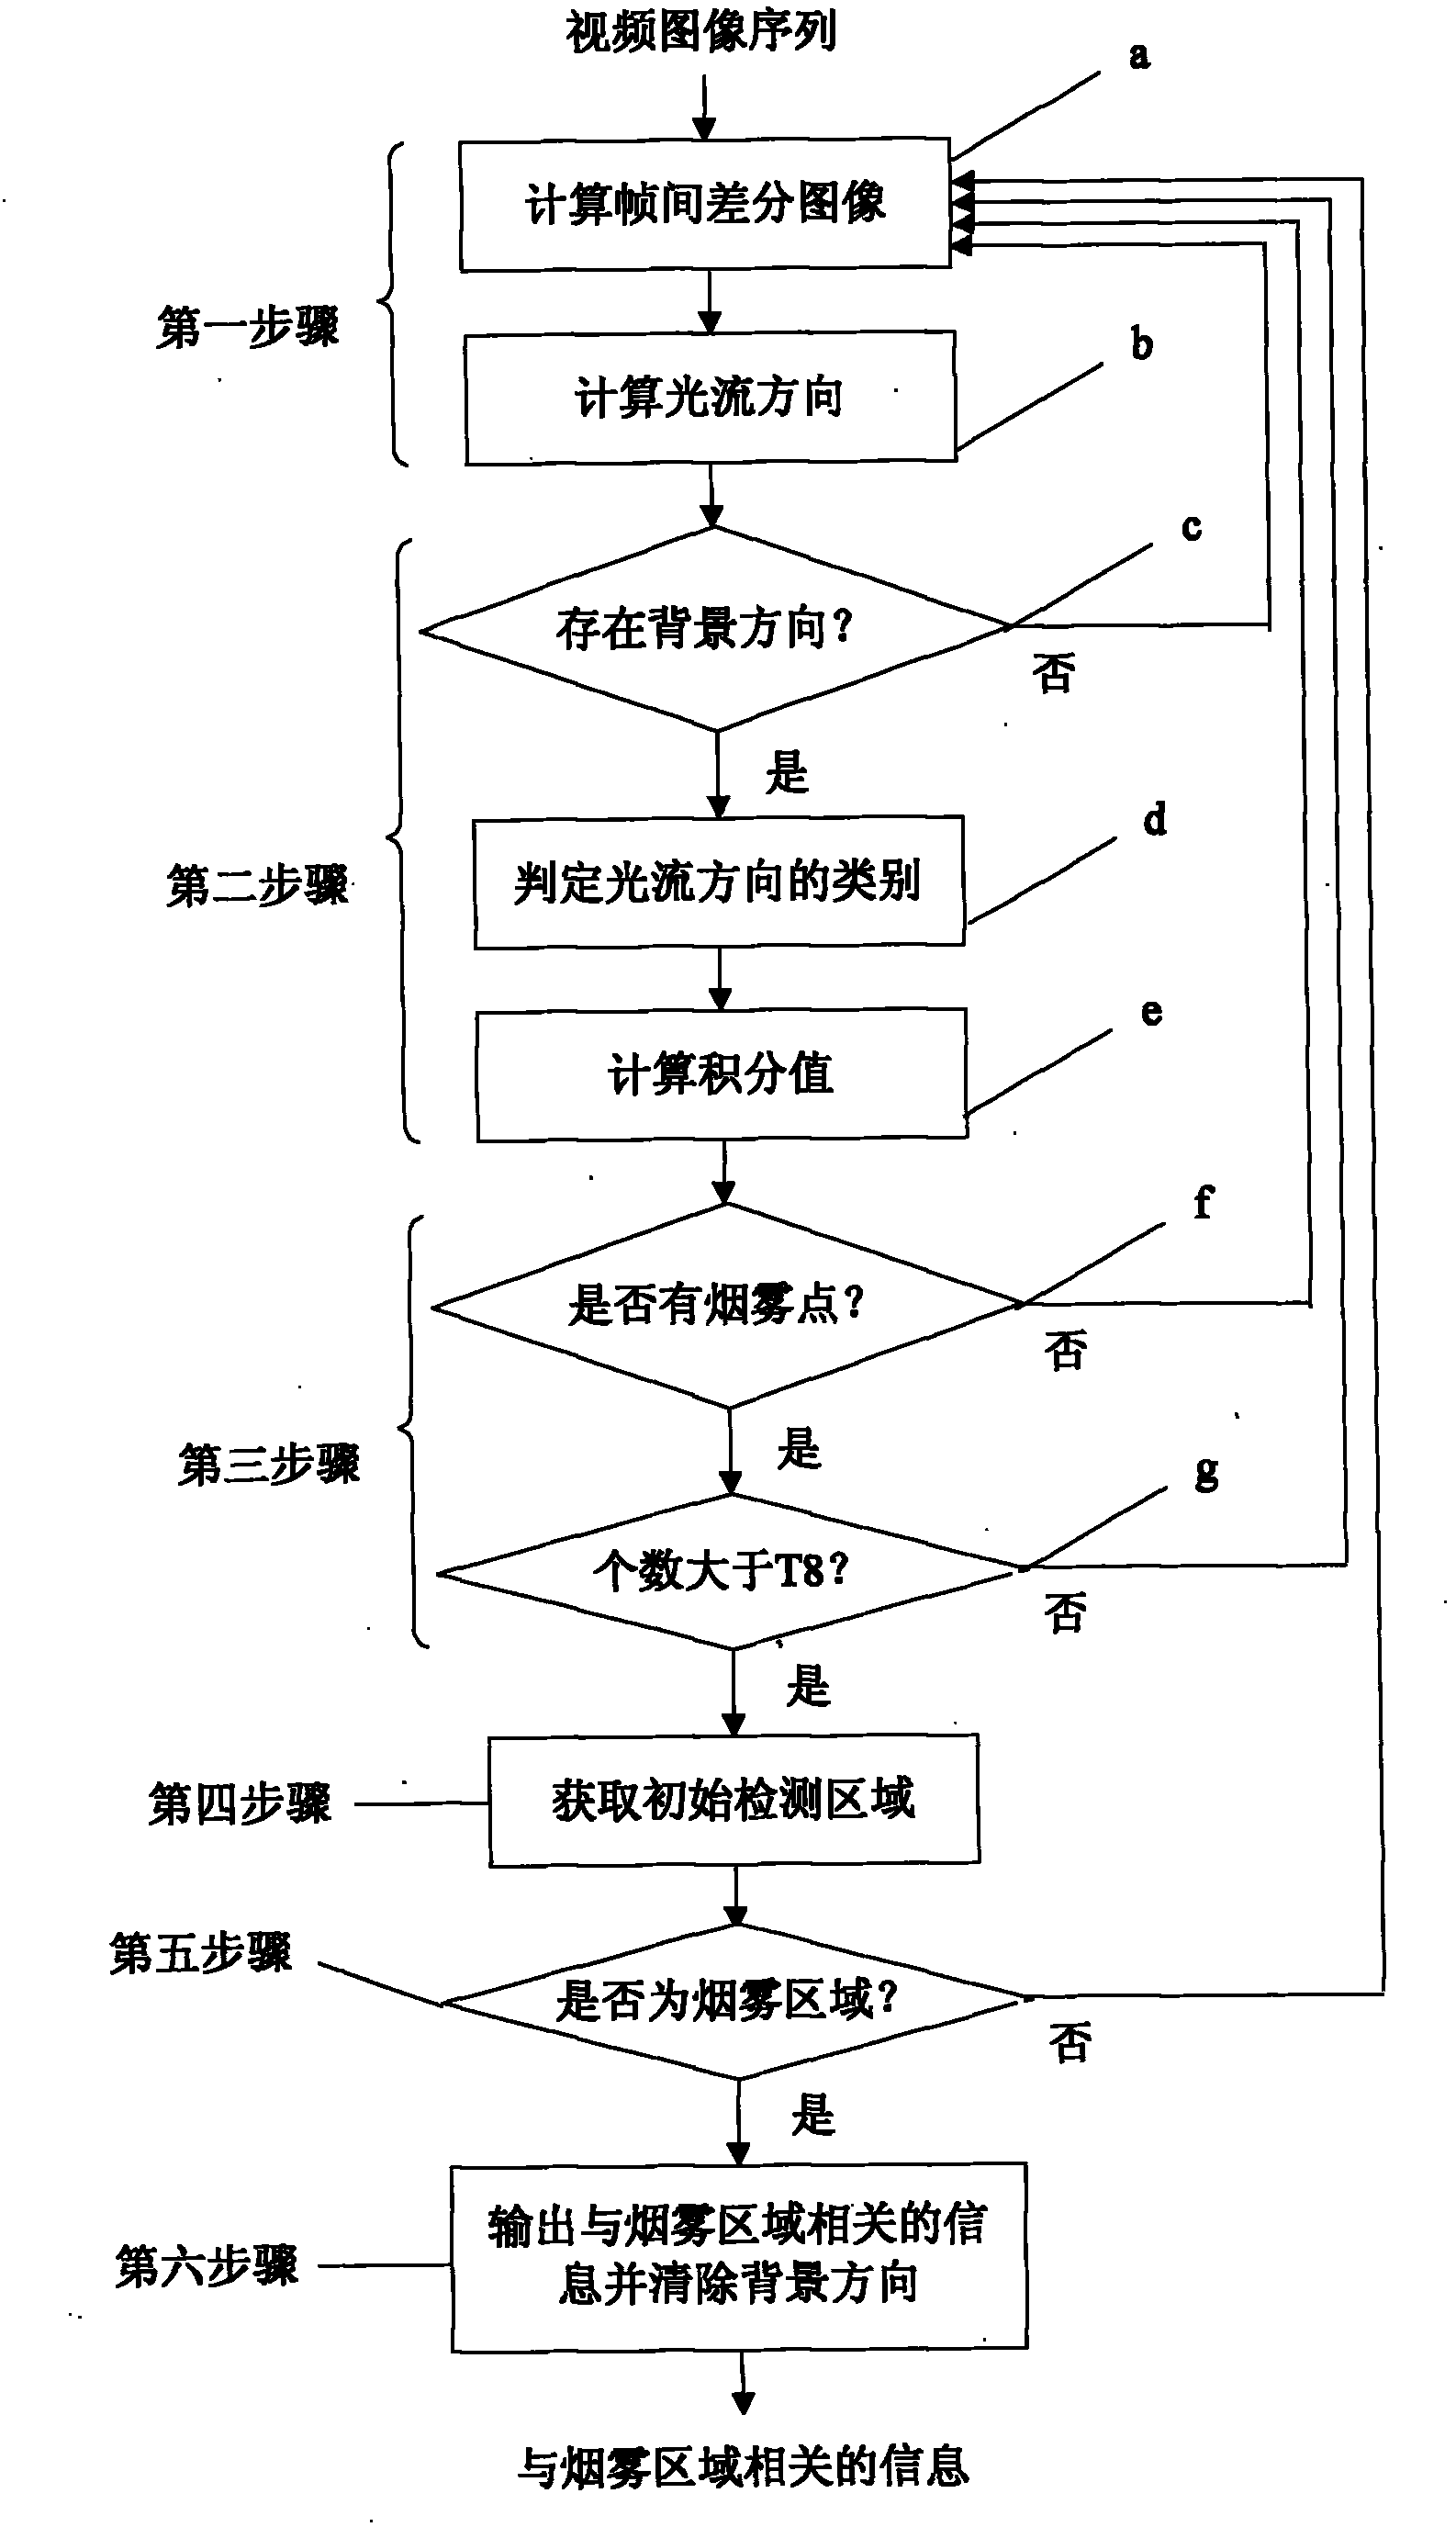 Method and device for detecting smoke in video image sequence